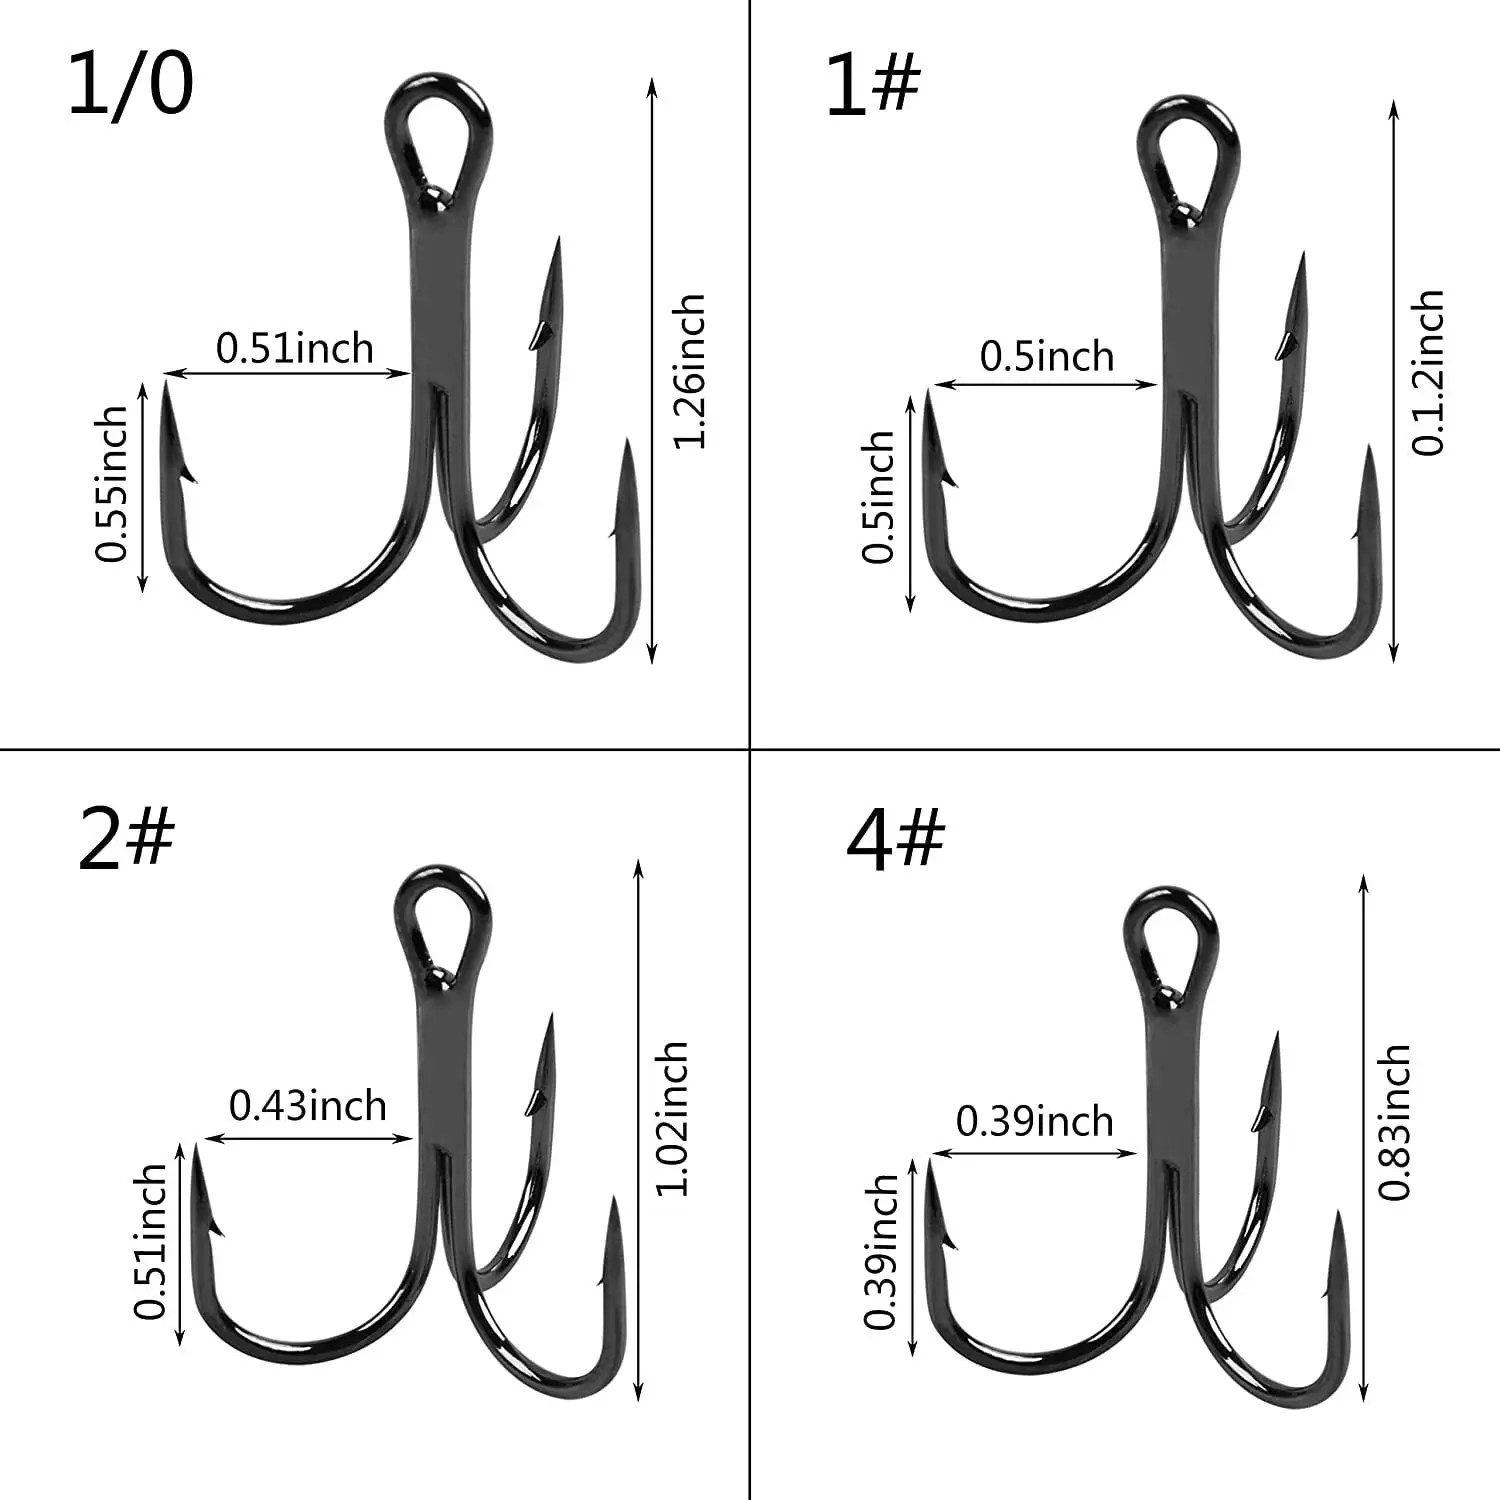 Treble Fishing Hooks Needlepoint 100pcs High Carbon Steel Treble Hooks  Strong Round Bend Small Wide Gap Fishhooks for Freshwater Saltwater Hook -  Sizes 1/0 2# 4# 6# 8# 10# 12# 14# Red 